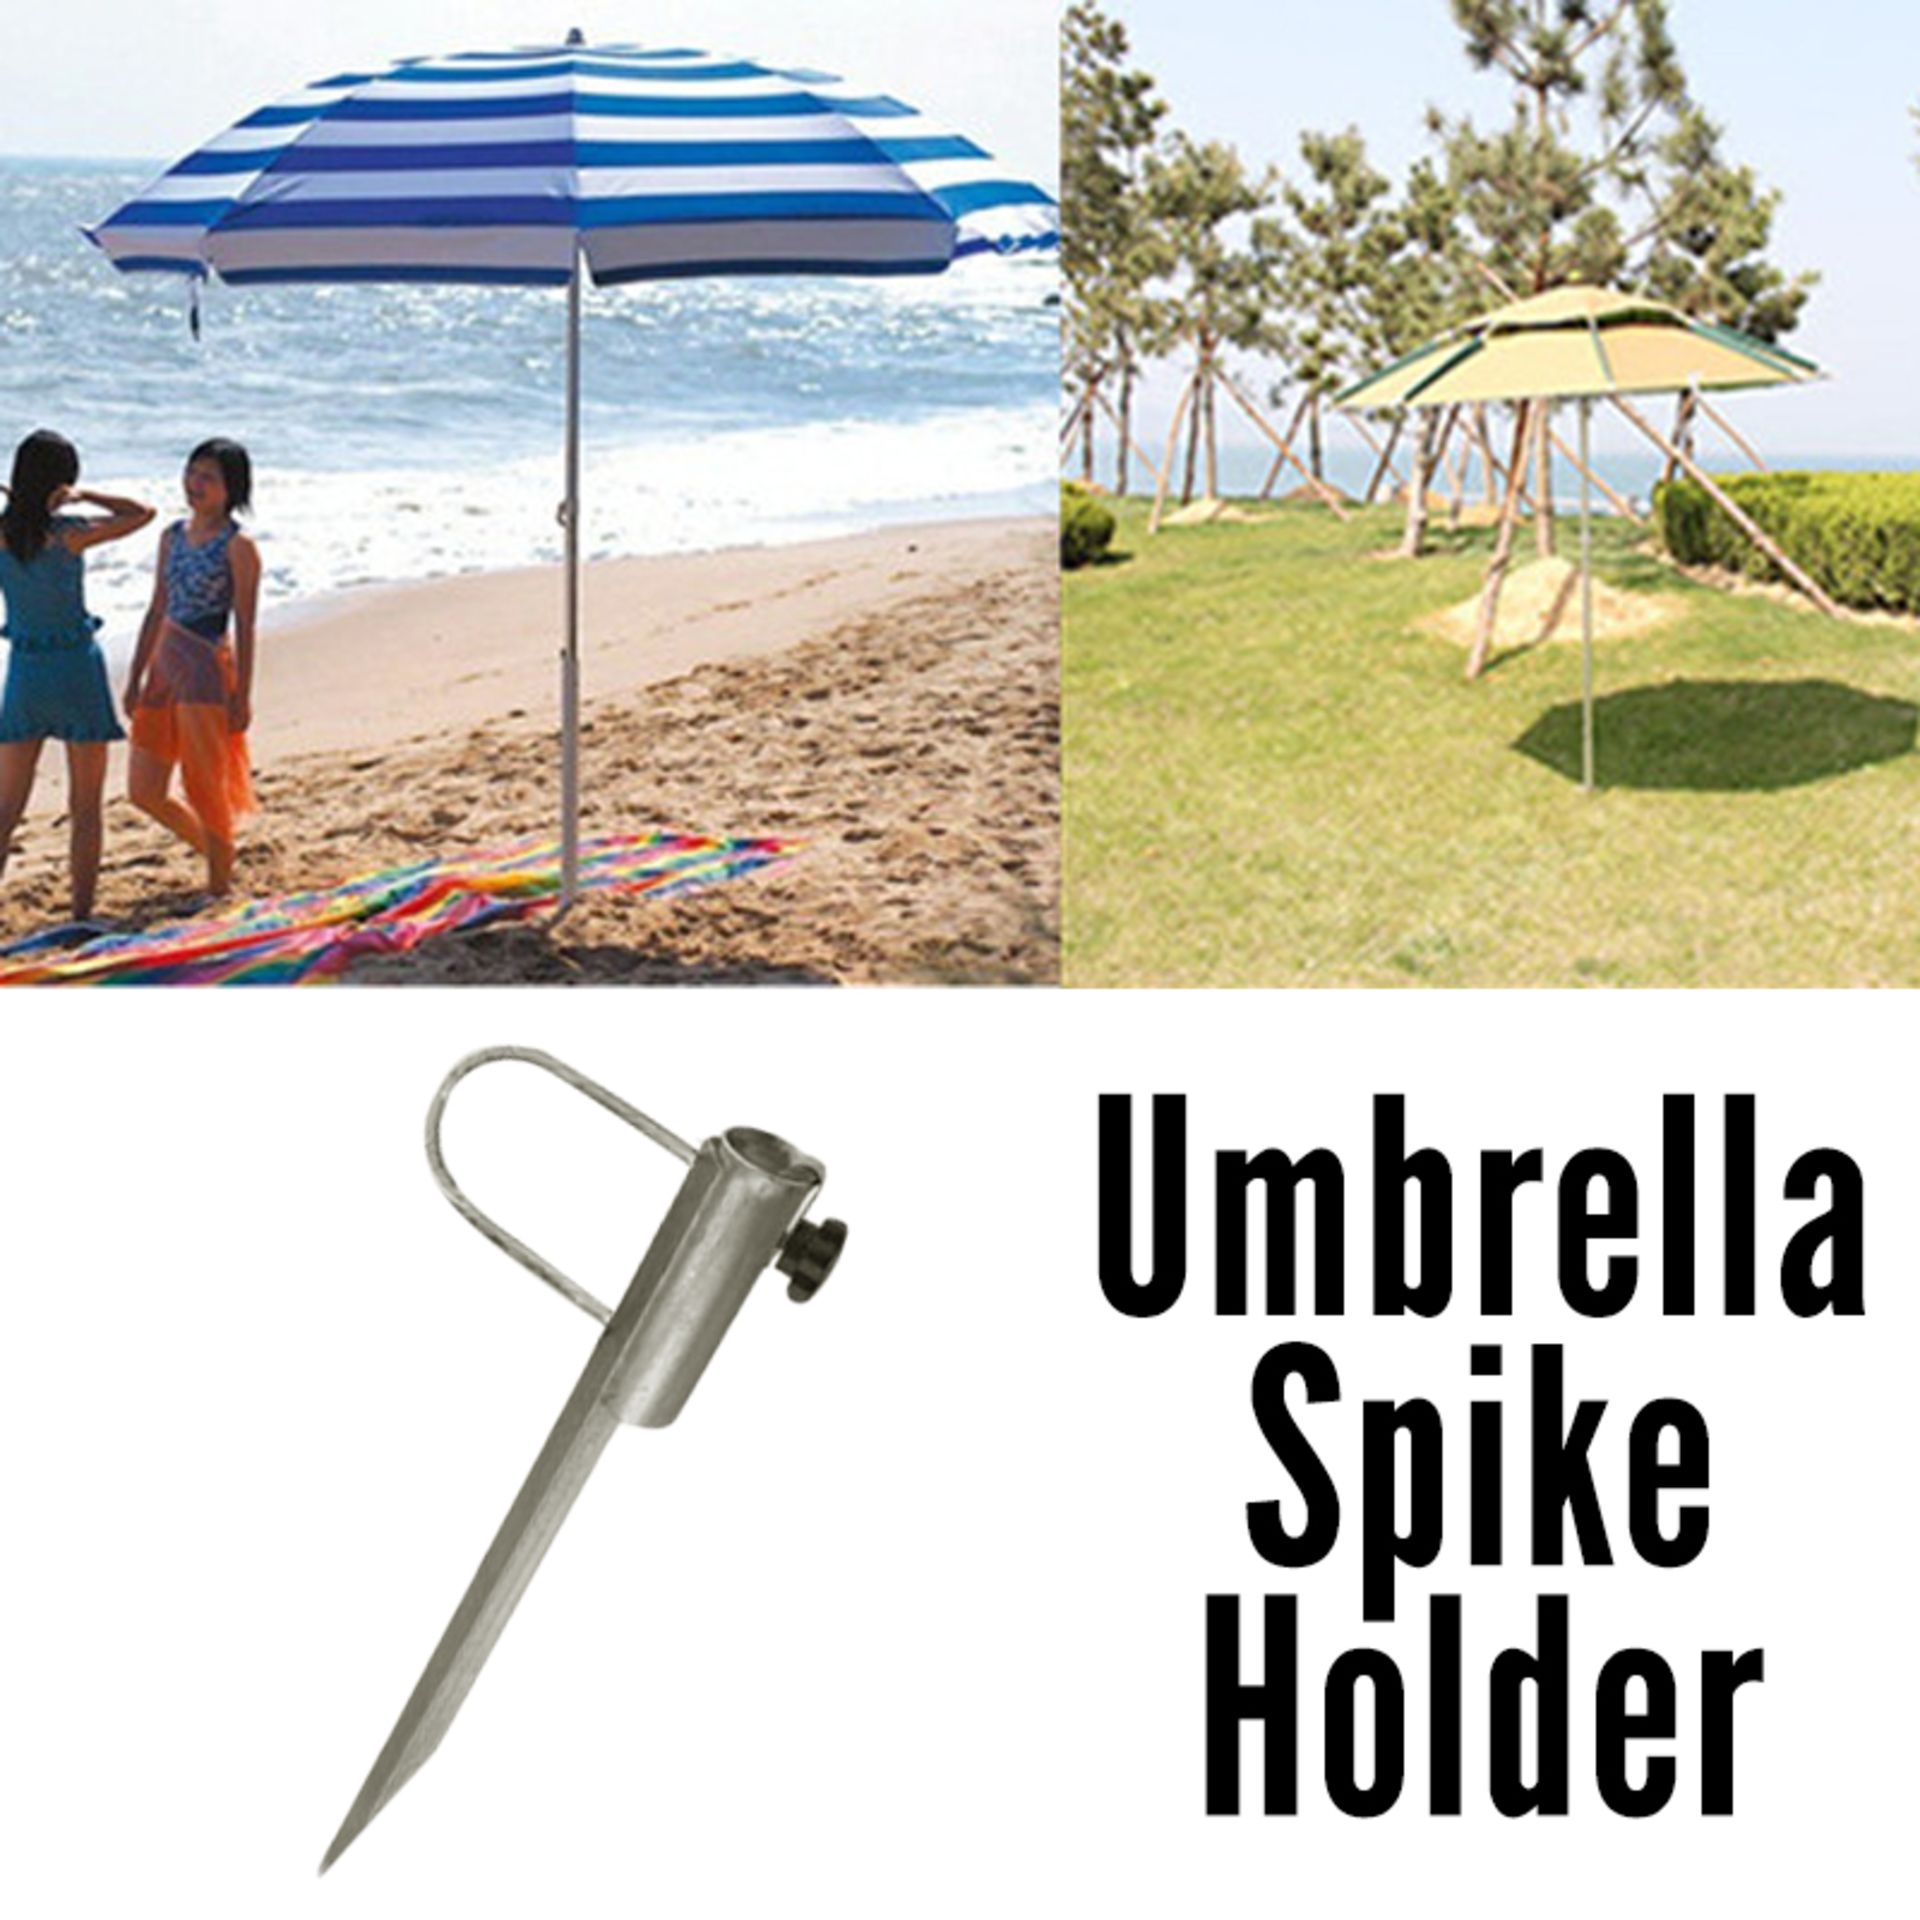 Heavy Duty - Adjustable Ground Metal Spike + 1x Waterproof Cover for Garden Camping Holiday